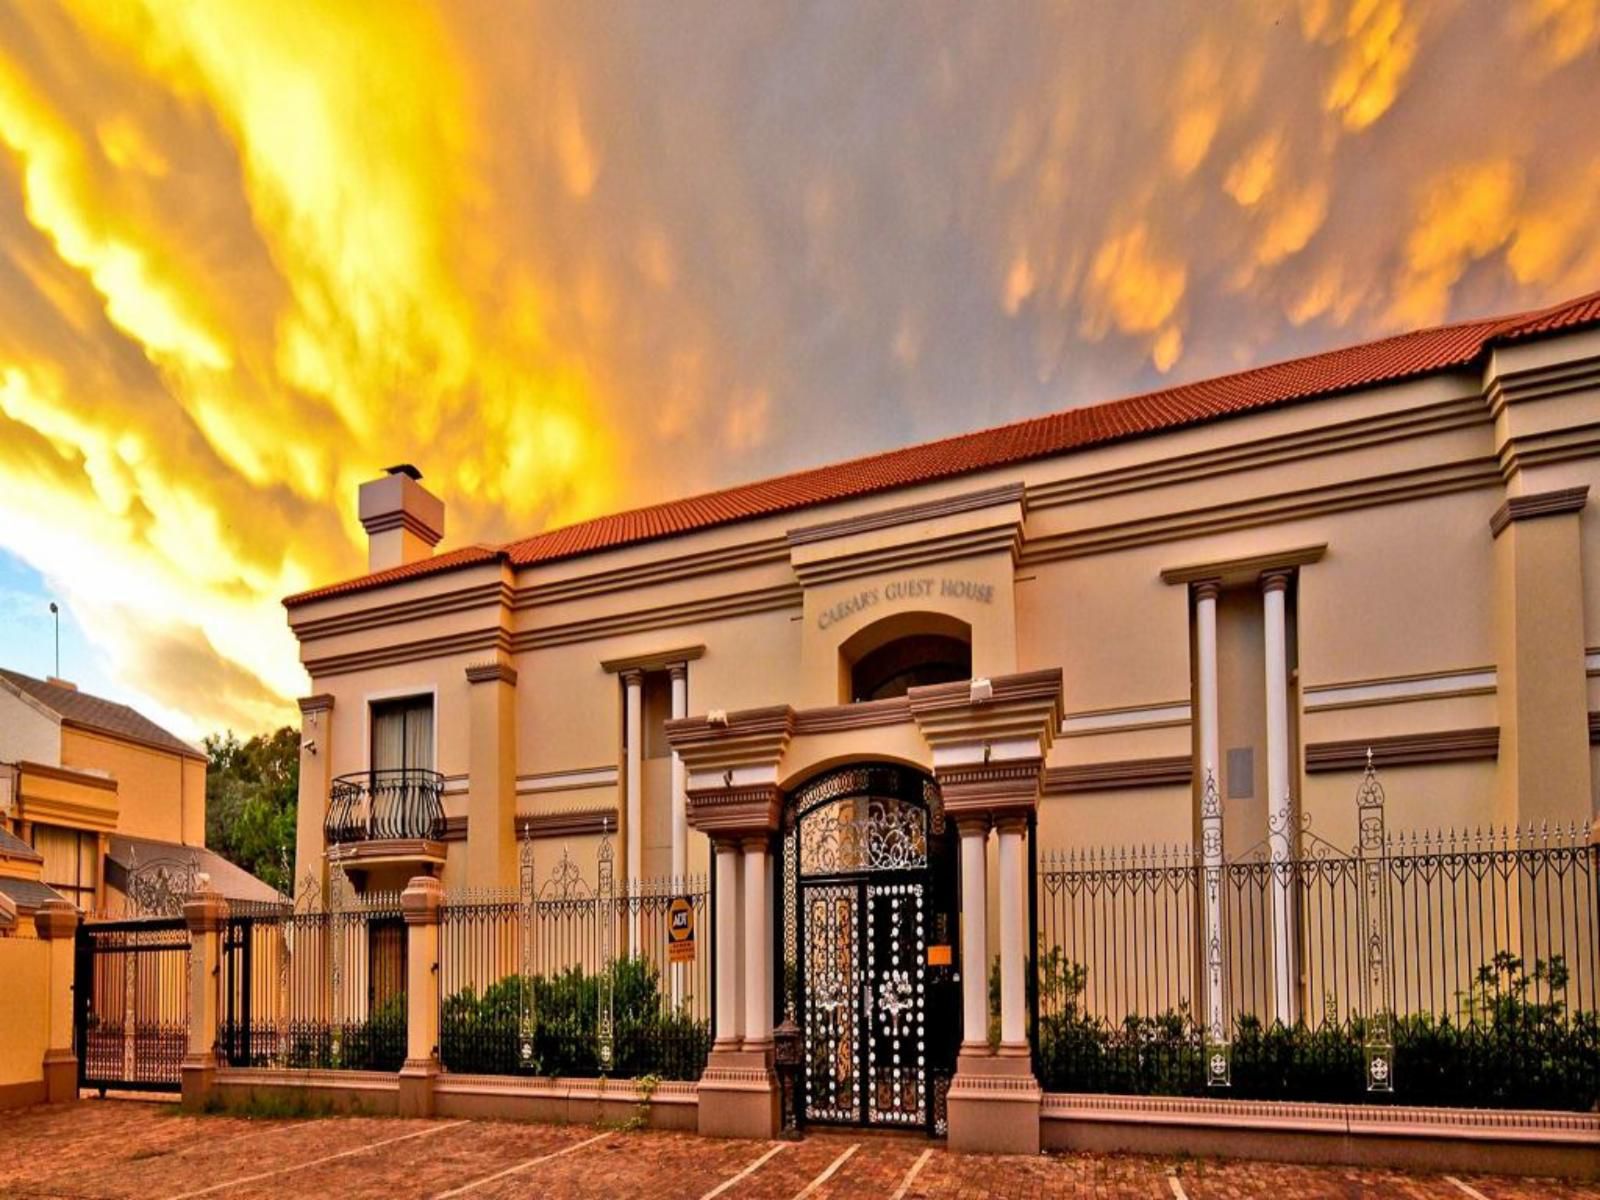 Caesars Guesthouse Sasolburg Free State South Africa Fire, Nature, House, Building, Architecture